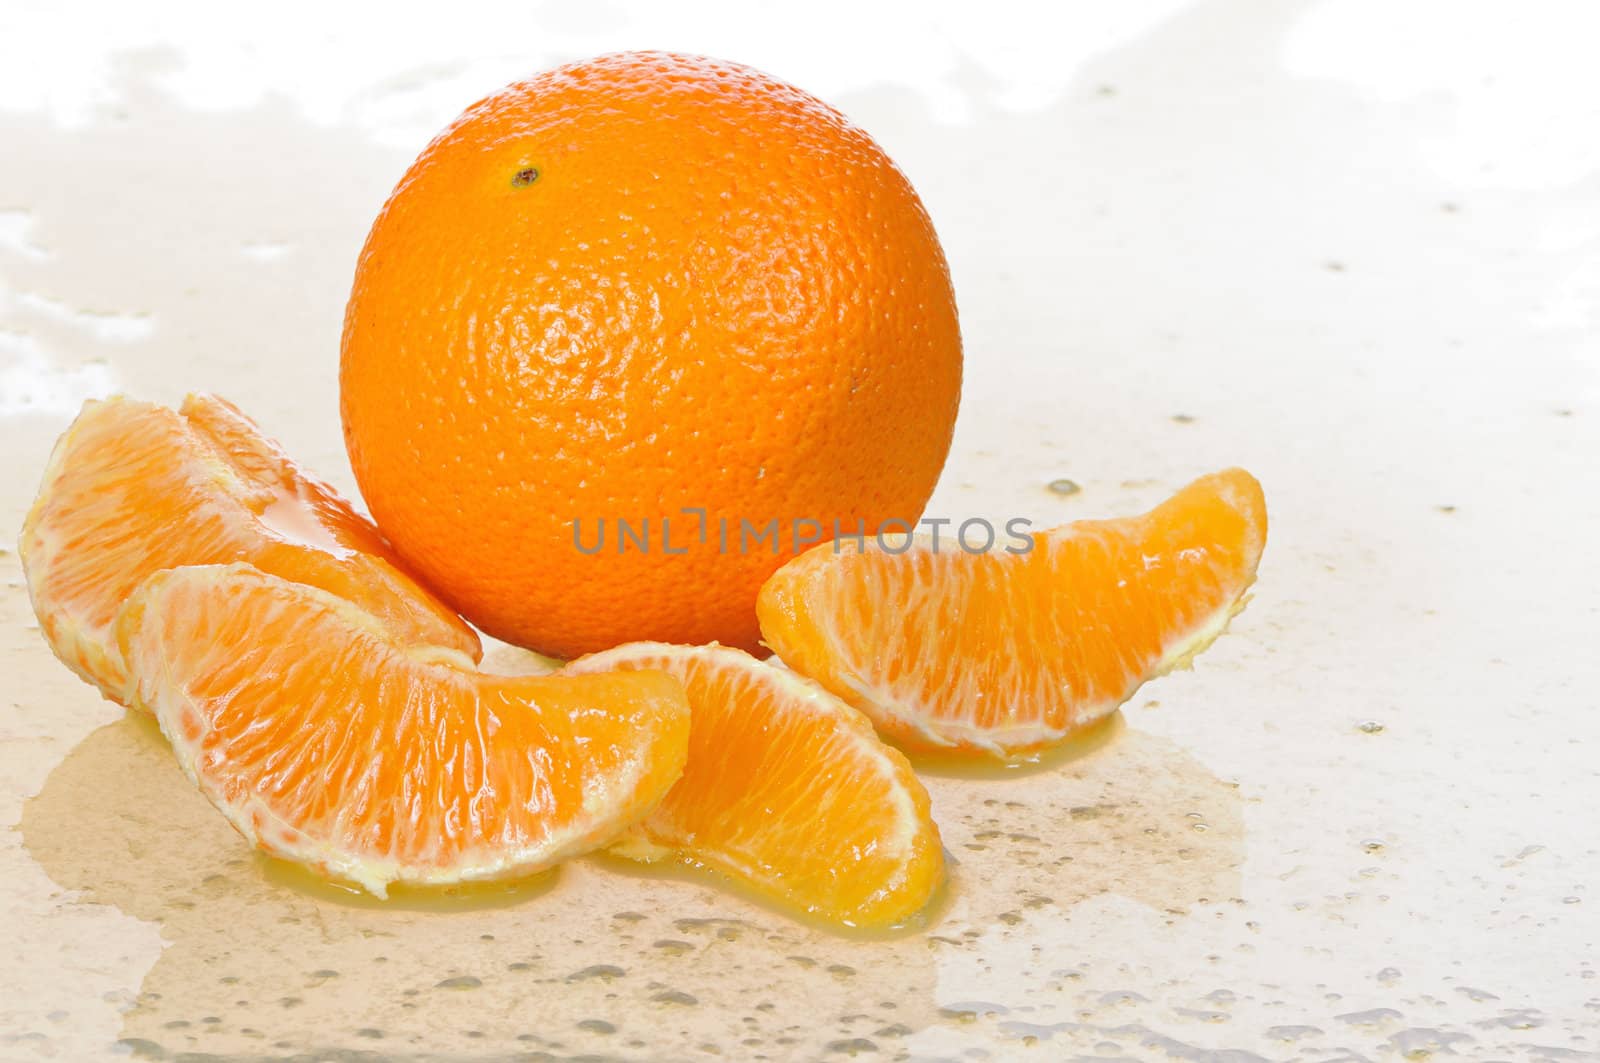 The whole orange with segments lays in juice